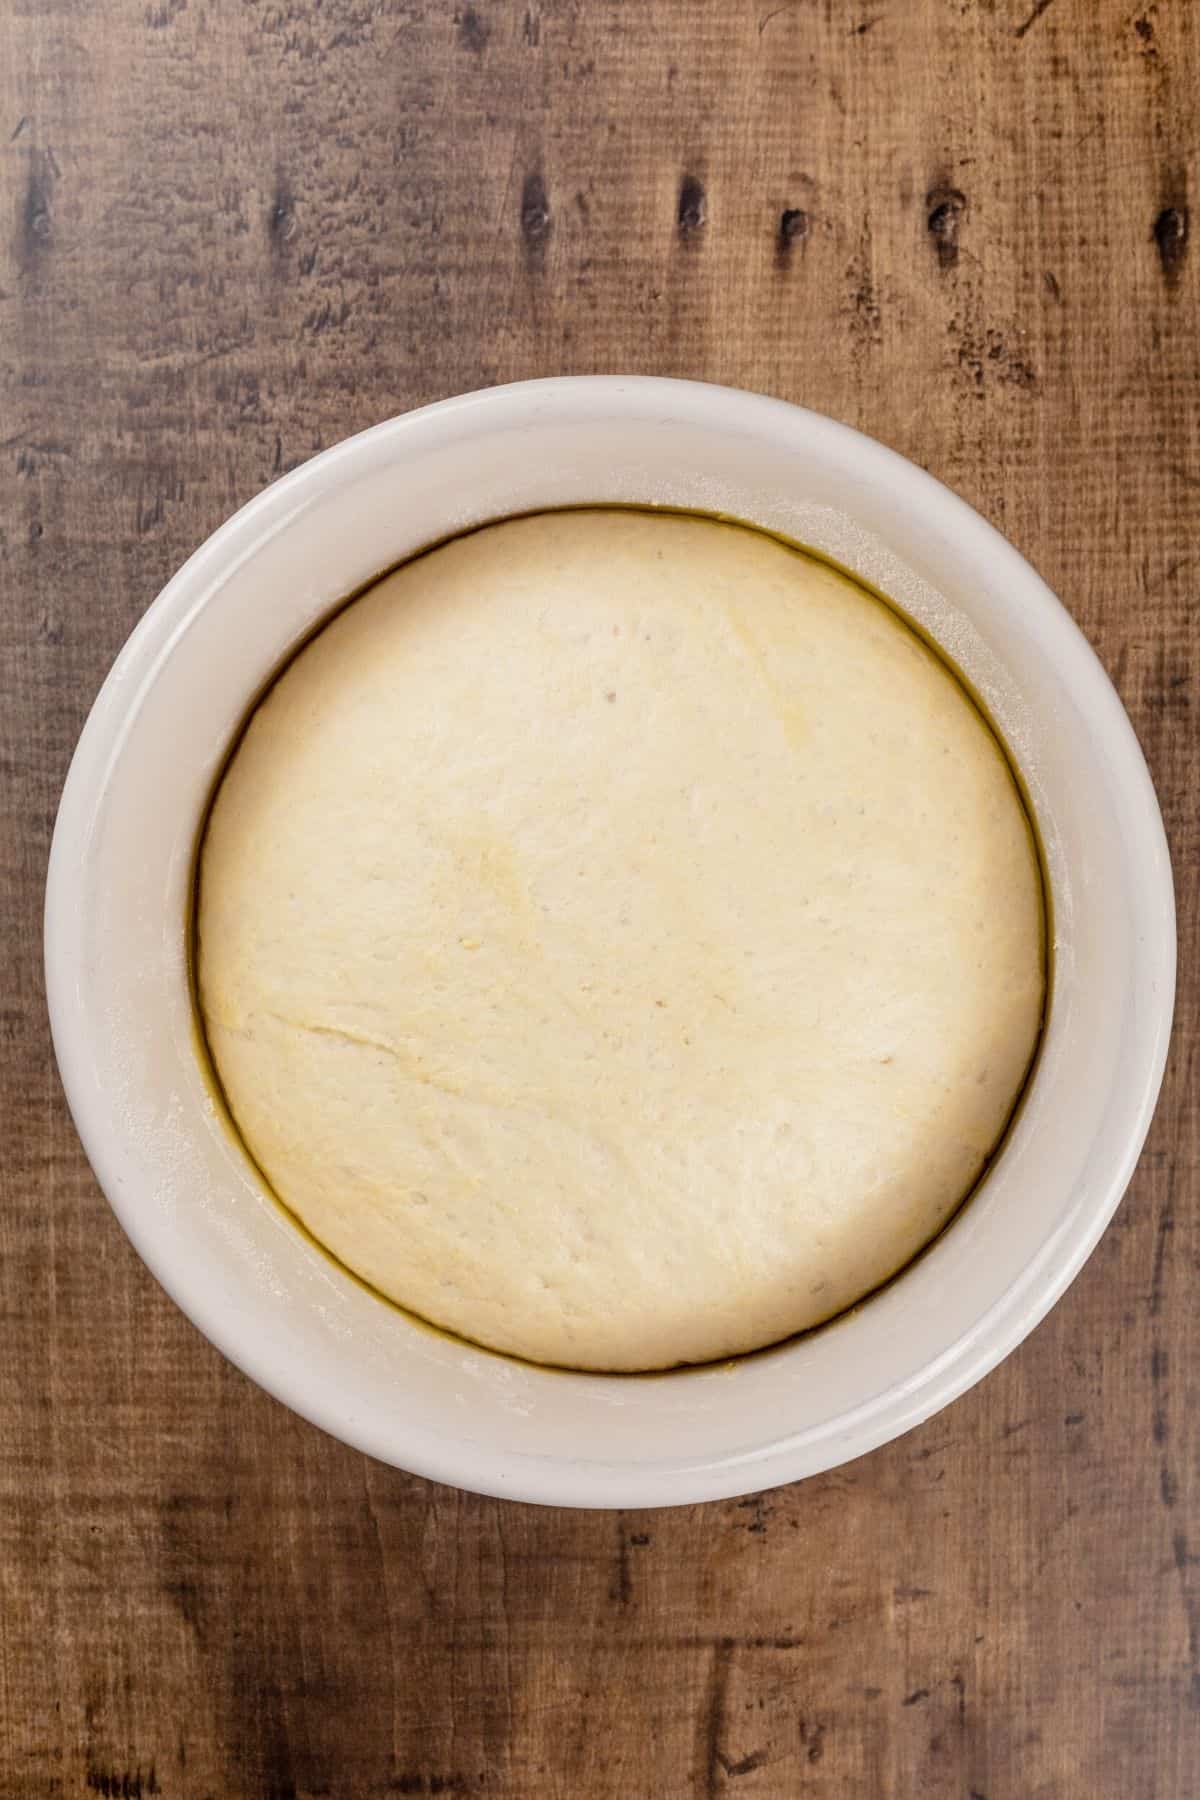 The fully risen pizza dough in the same ceramic bowl. You can see how full the bowl has become. It is resting on a wood tabletop.